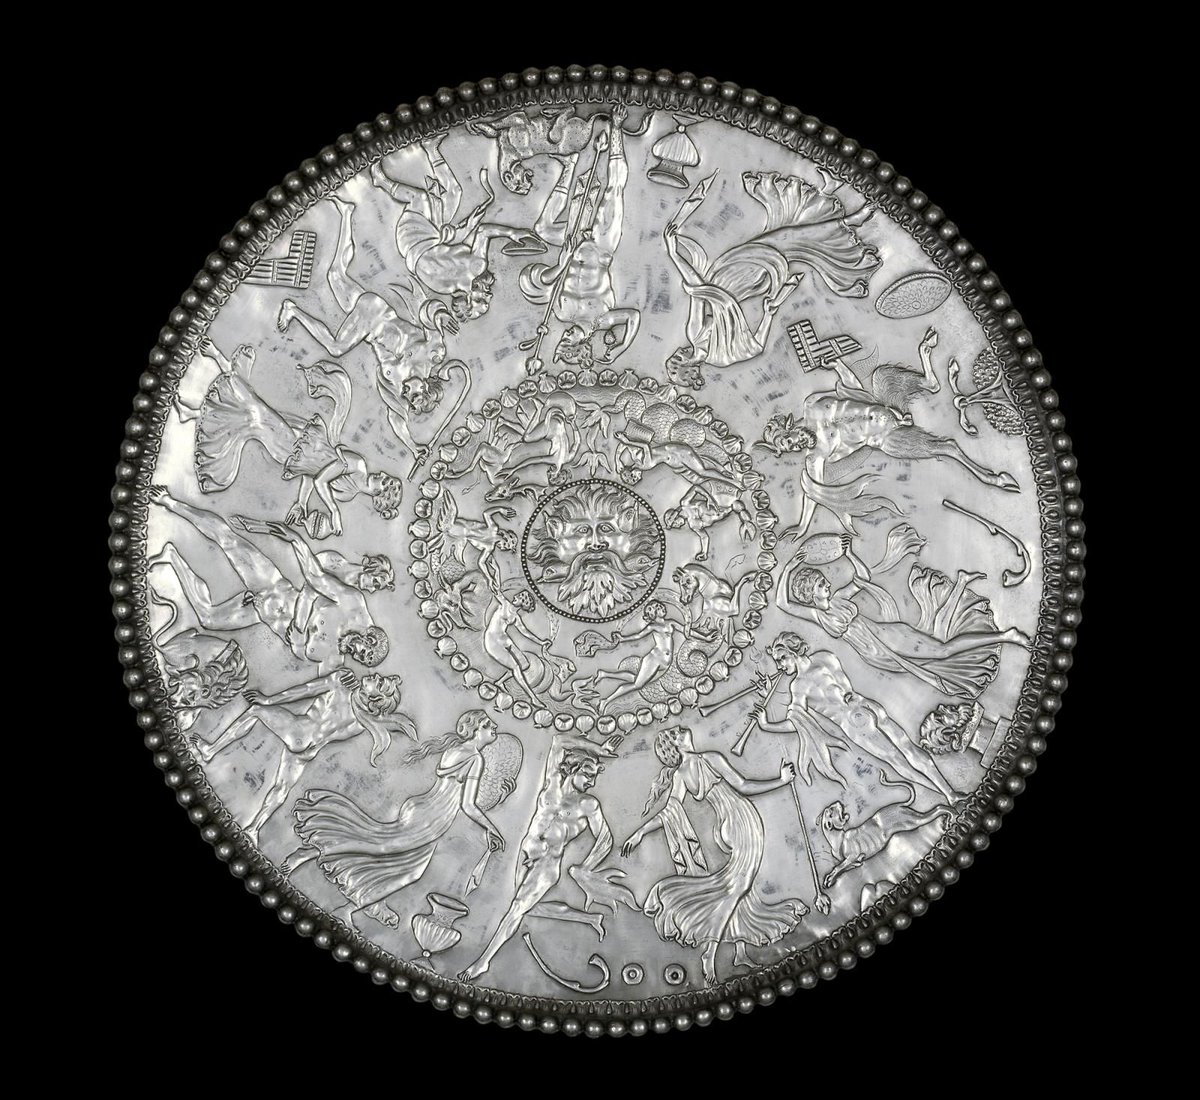 The Great Dish from the Mildenhall Treasure, a hoard of #Roman #silver tableware. 4th C, Suffolk. It features a celebration for #Bacchus with dancing, singing & drinking, Pan, satyrs, maenads. The centre shows Oceanus surrounded by mythical marine creatures. @britishmuseum